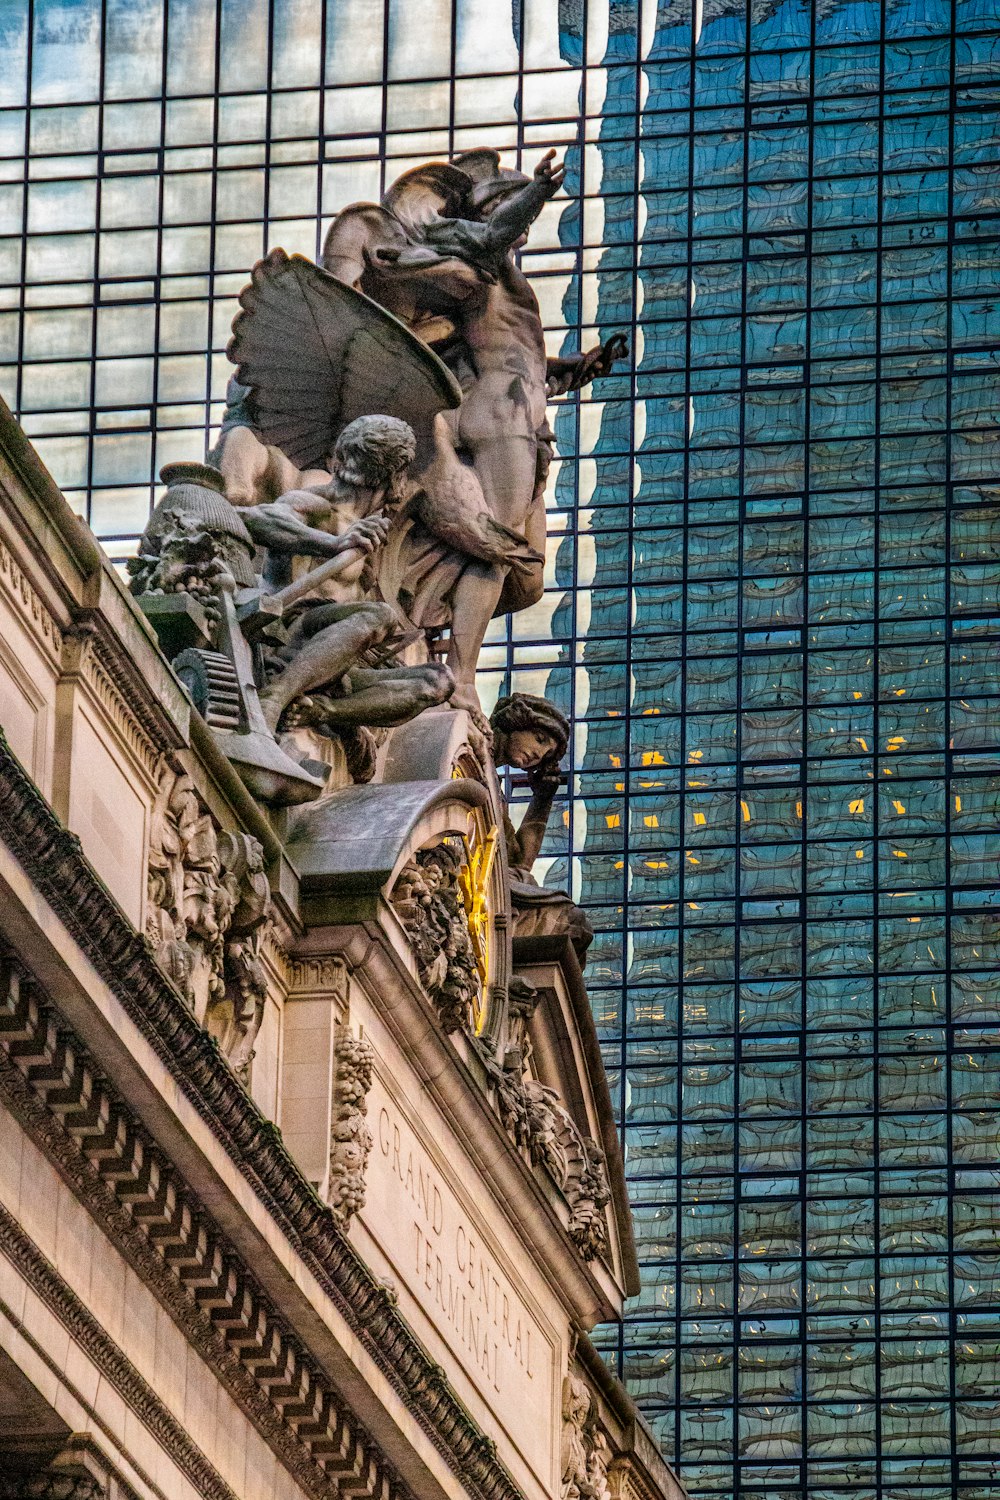 a statue of a man riding a horse on top of a building